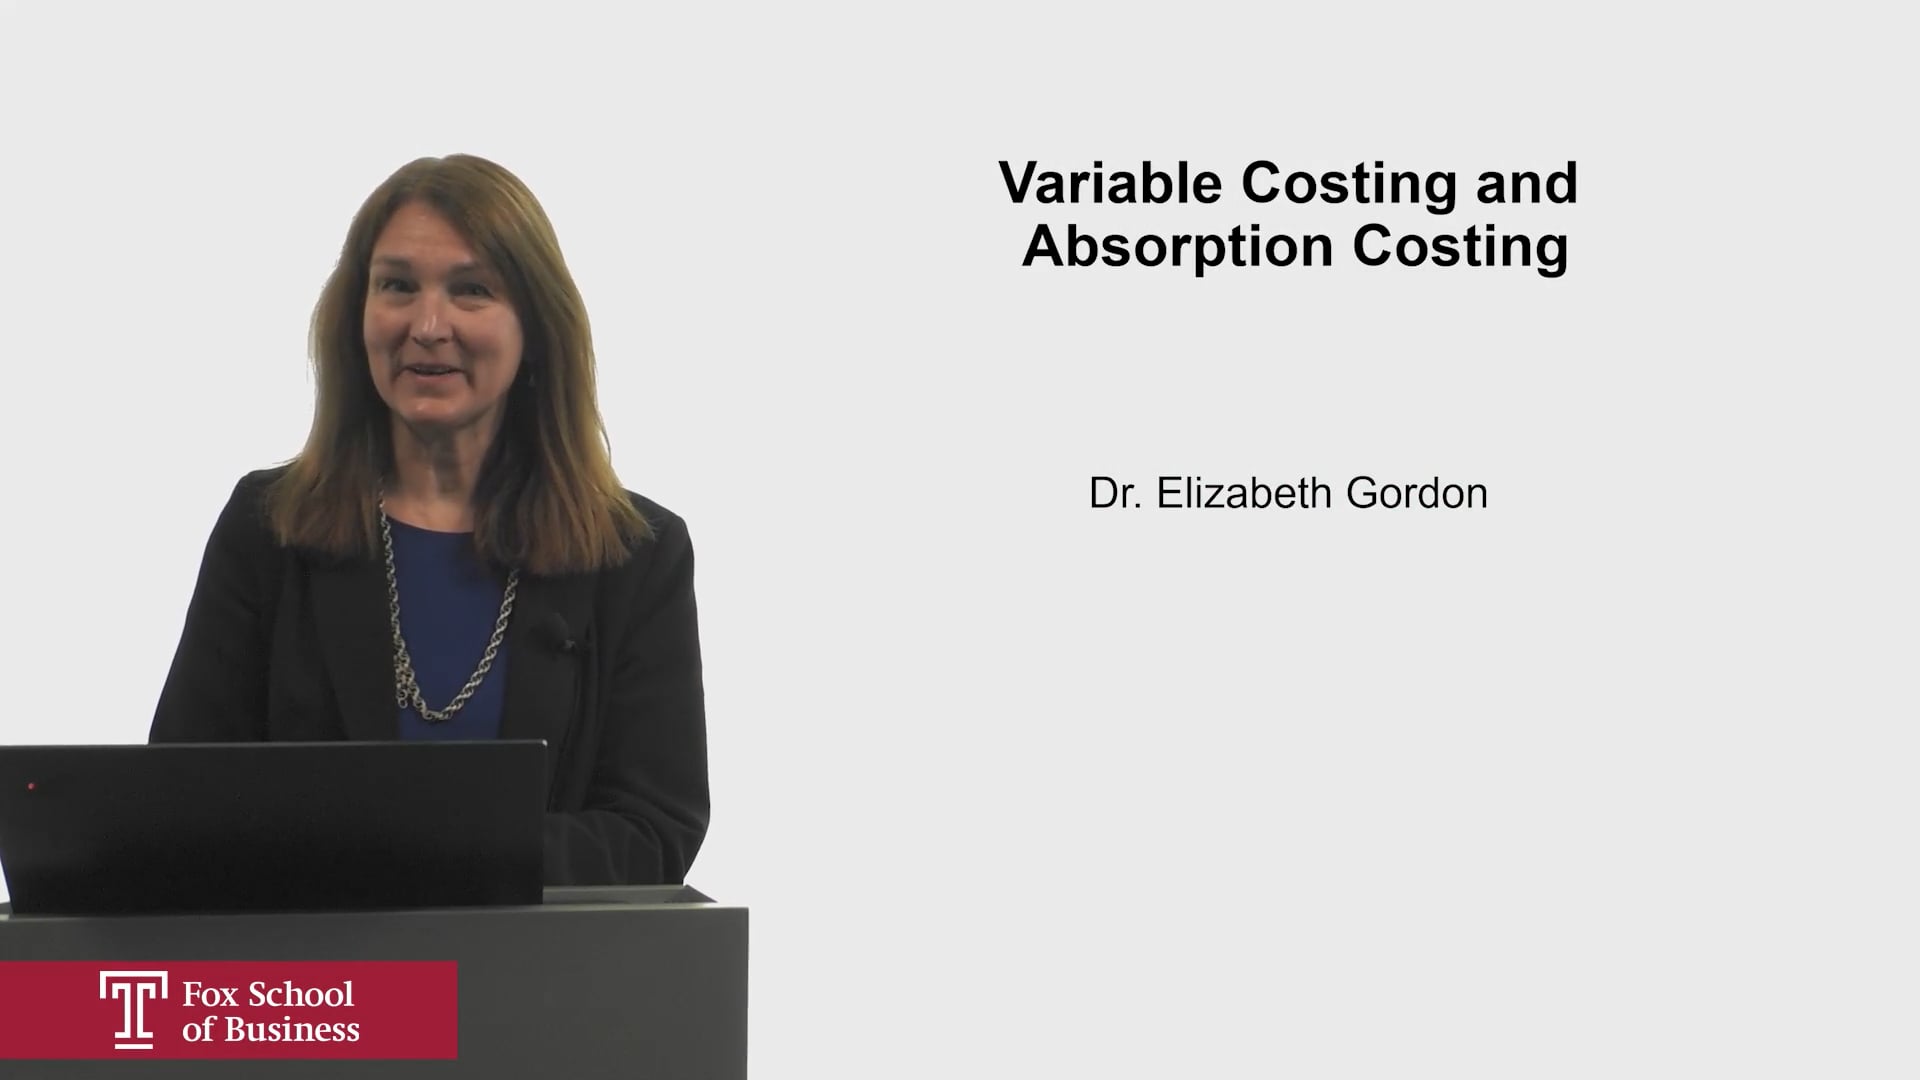 Variable Costing and Absorption Costing